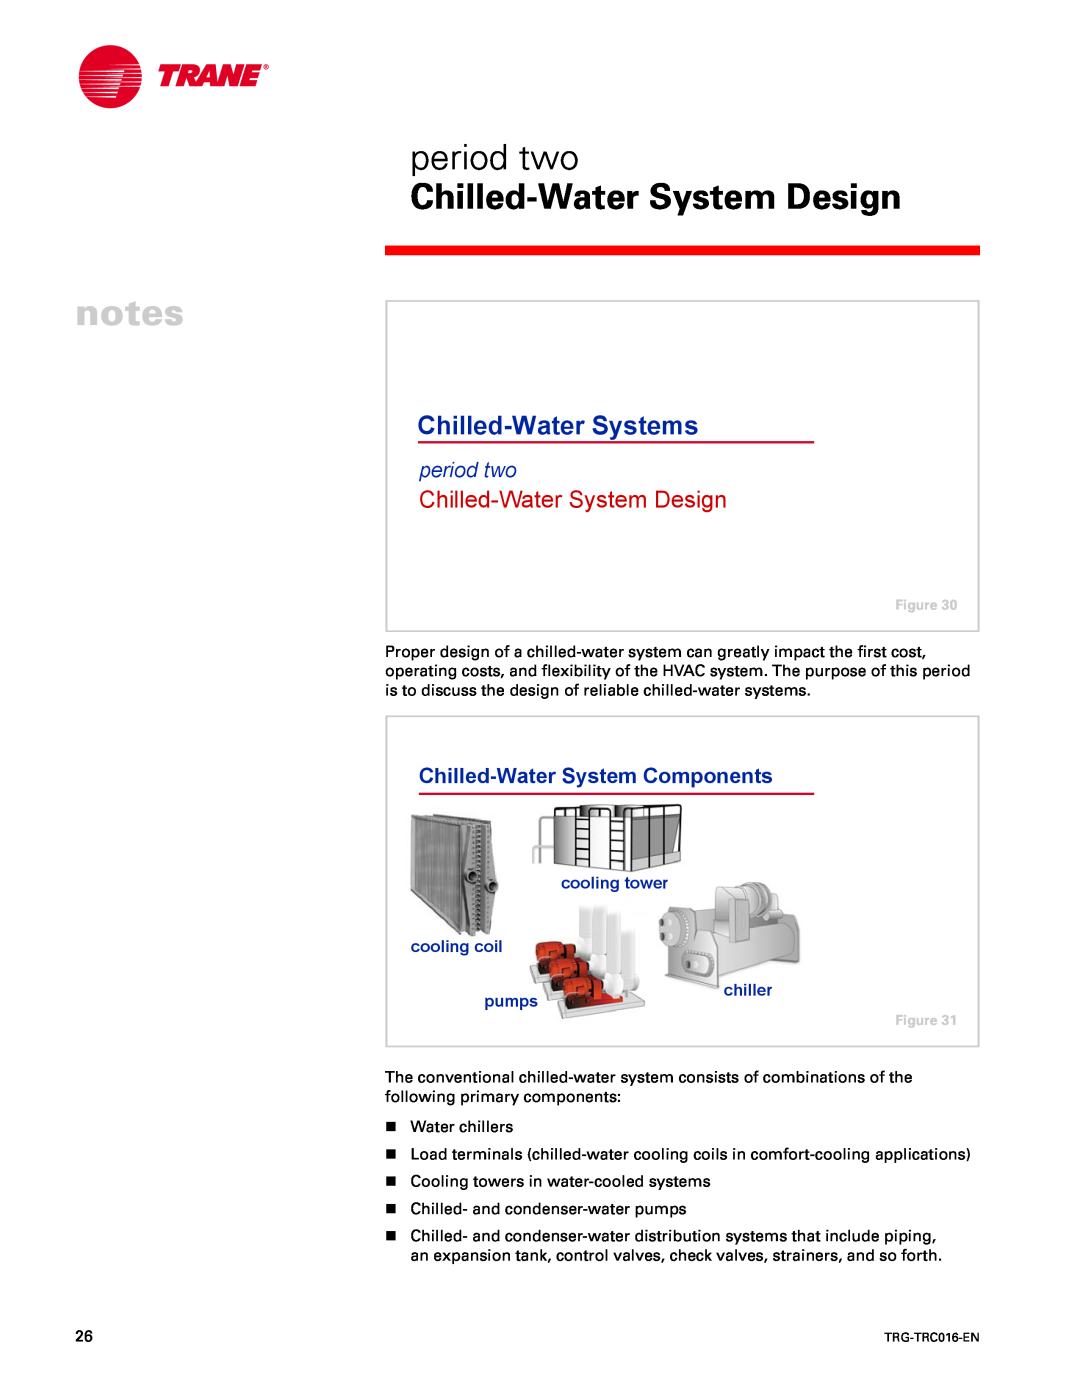 Trane TRG-TRC016-EN period two, Chilled-WaterSystem Design, Chilled-WaterSystem Components, notes, Chilled-WaterSystems 